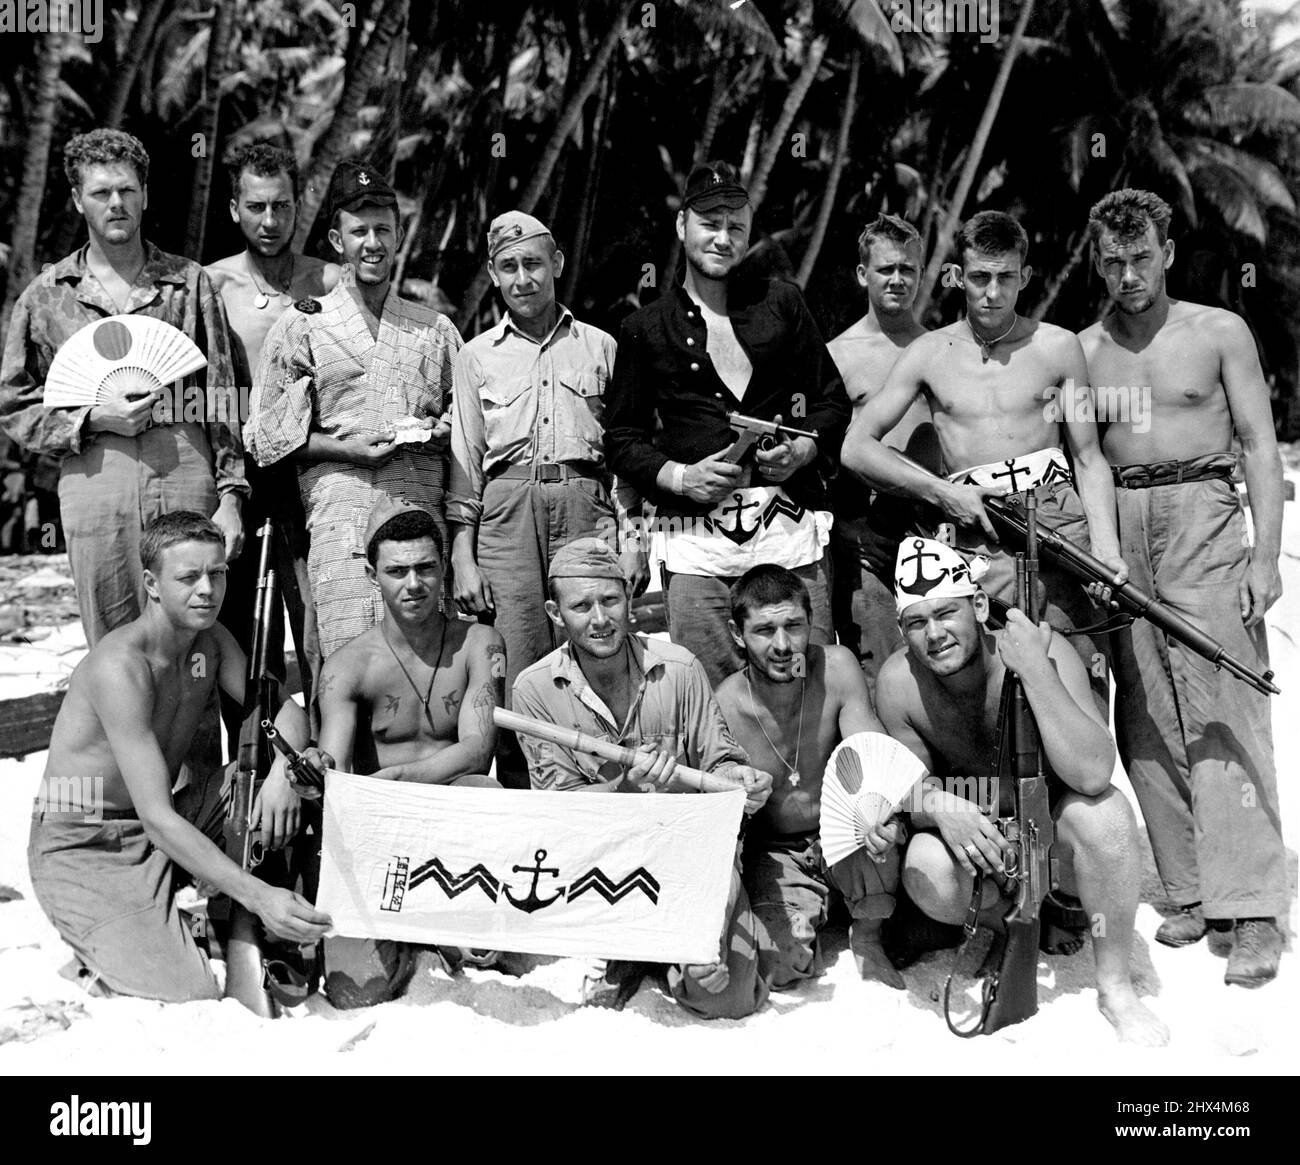 Marines With Pacific Battle TrophiesAfter having cleared Tarawa of the enemy, these Marines wear and display some of the Japanese trophies they picked up in battle. This group went to Apamama after Tarawa, left to right (standing): PFC Robert M. Phillips, Milwaukee, Wis.; Cpl. Raymond W. Boese, Bloomer, Wis.; PFC Herman Kaufman, Chicago, Ill.; Lieut. J. B. McPeters, Killen, Ala.; Sgt. Stanley V. Grooms, Everett, Mass.; PFC Peter A. Olson, Berkeley, Calif.; Pvt. Alvin G. Shulz, Lake Mills, Wis.; and Cpl. Charles F. Wolfe, Ada, Ohio. Seated: PFC Donald R. Nielson, Neenah, Wis.; Pvt. Oscar J. Str Stock Photo